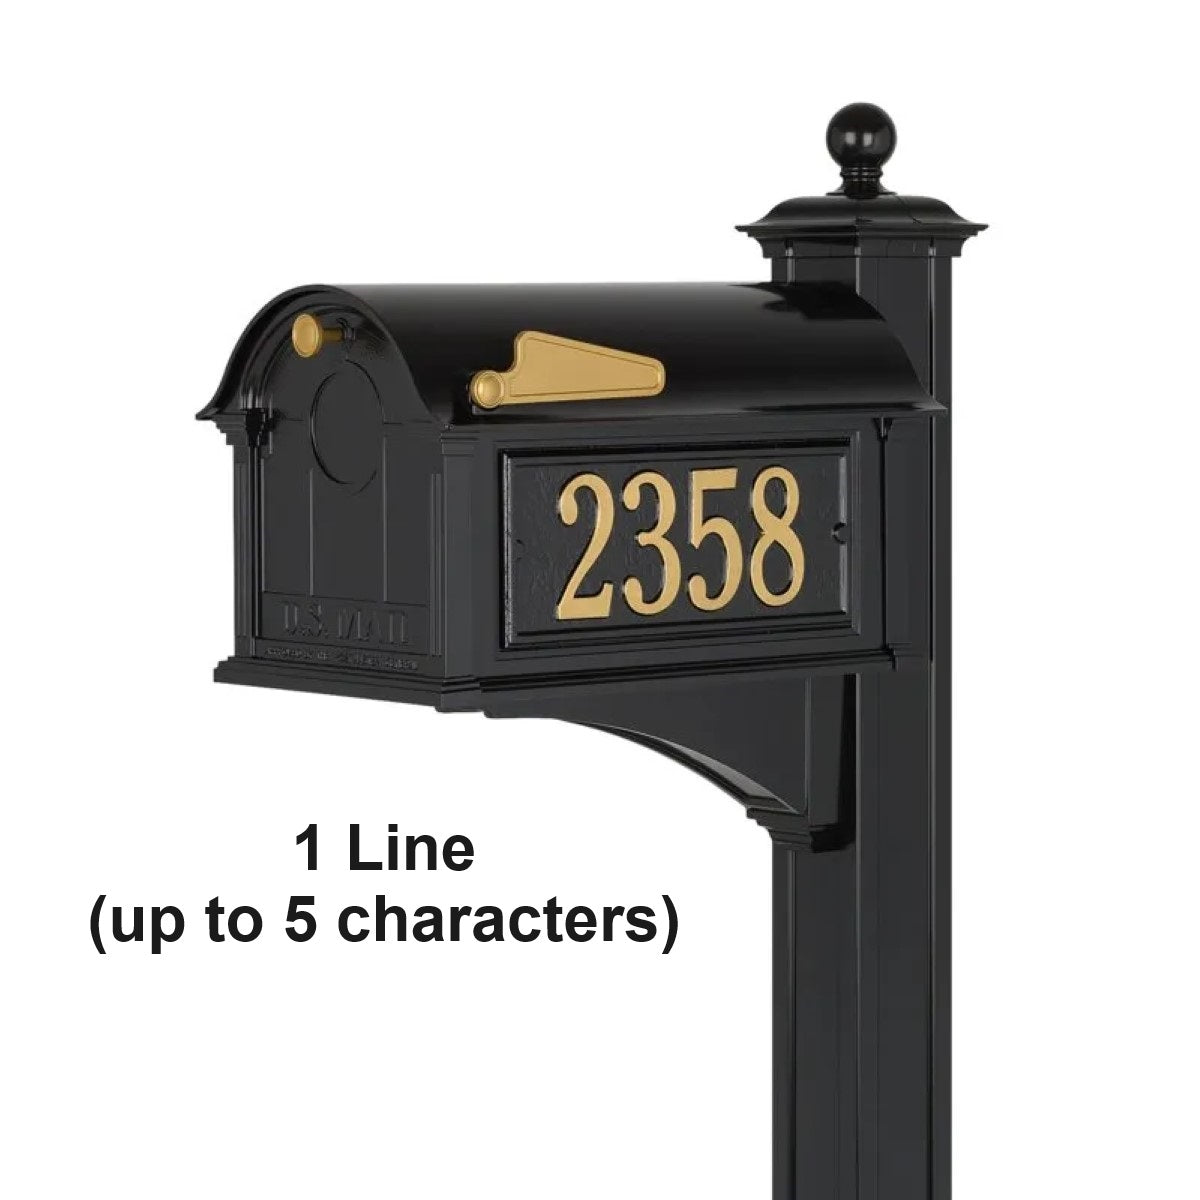 Whitehall Products Personalized Mailbox Side Plaques (5 Styles)